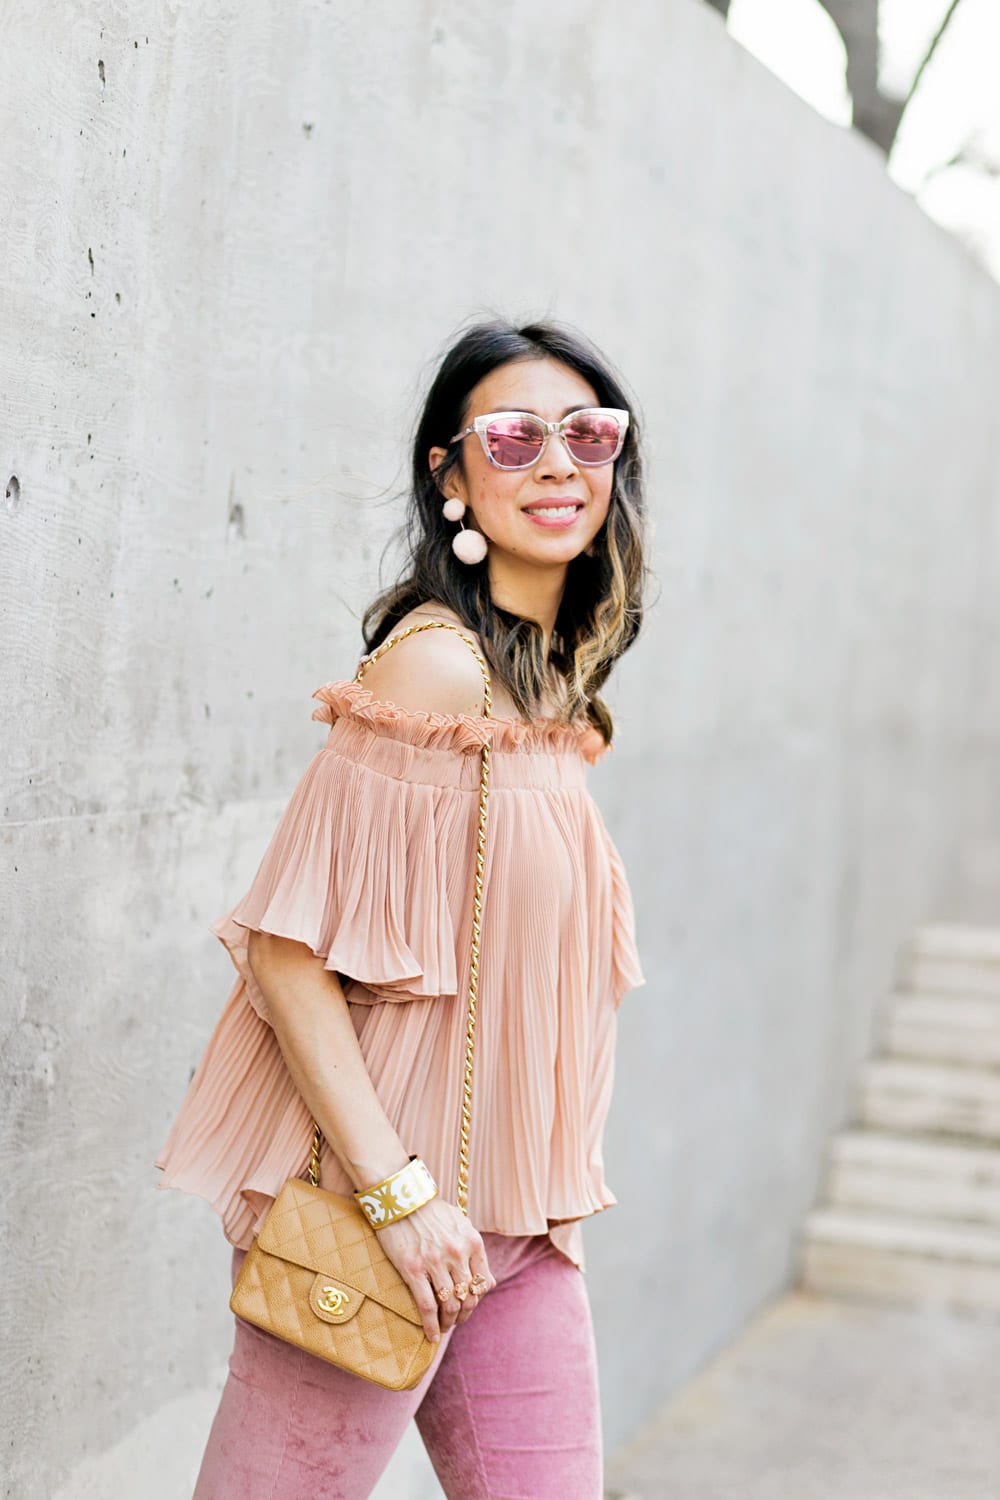 baublebar bahama pink pom pm earrings with endless rose pink pleated off the shoulder top and pink flare corduroy pants, chanel caviar mini flap, dior diorama pink mirrored sunglasses, spring outfit idea 